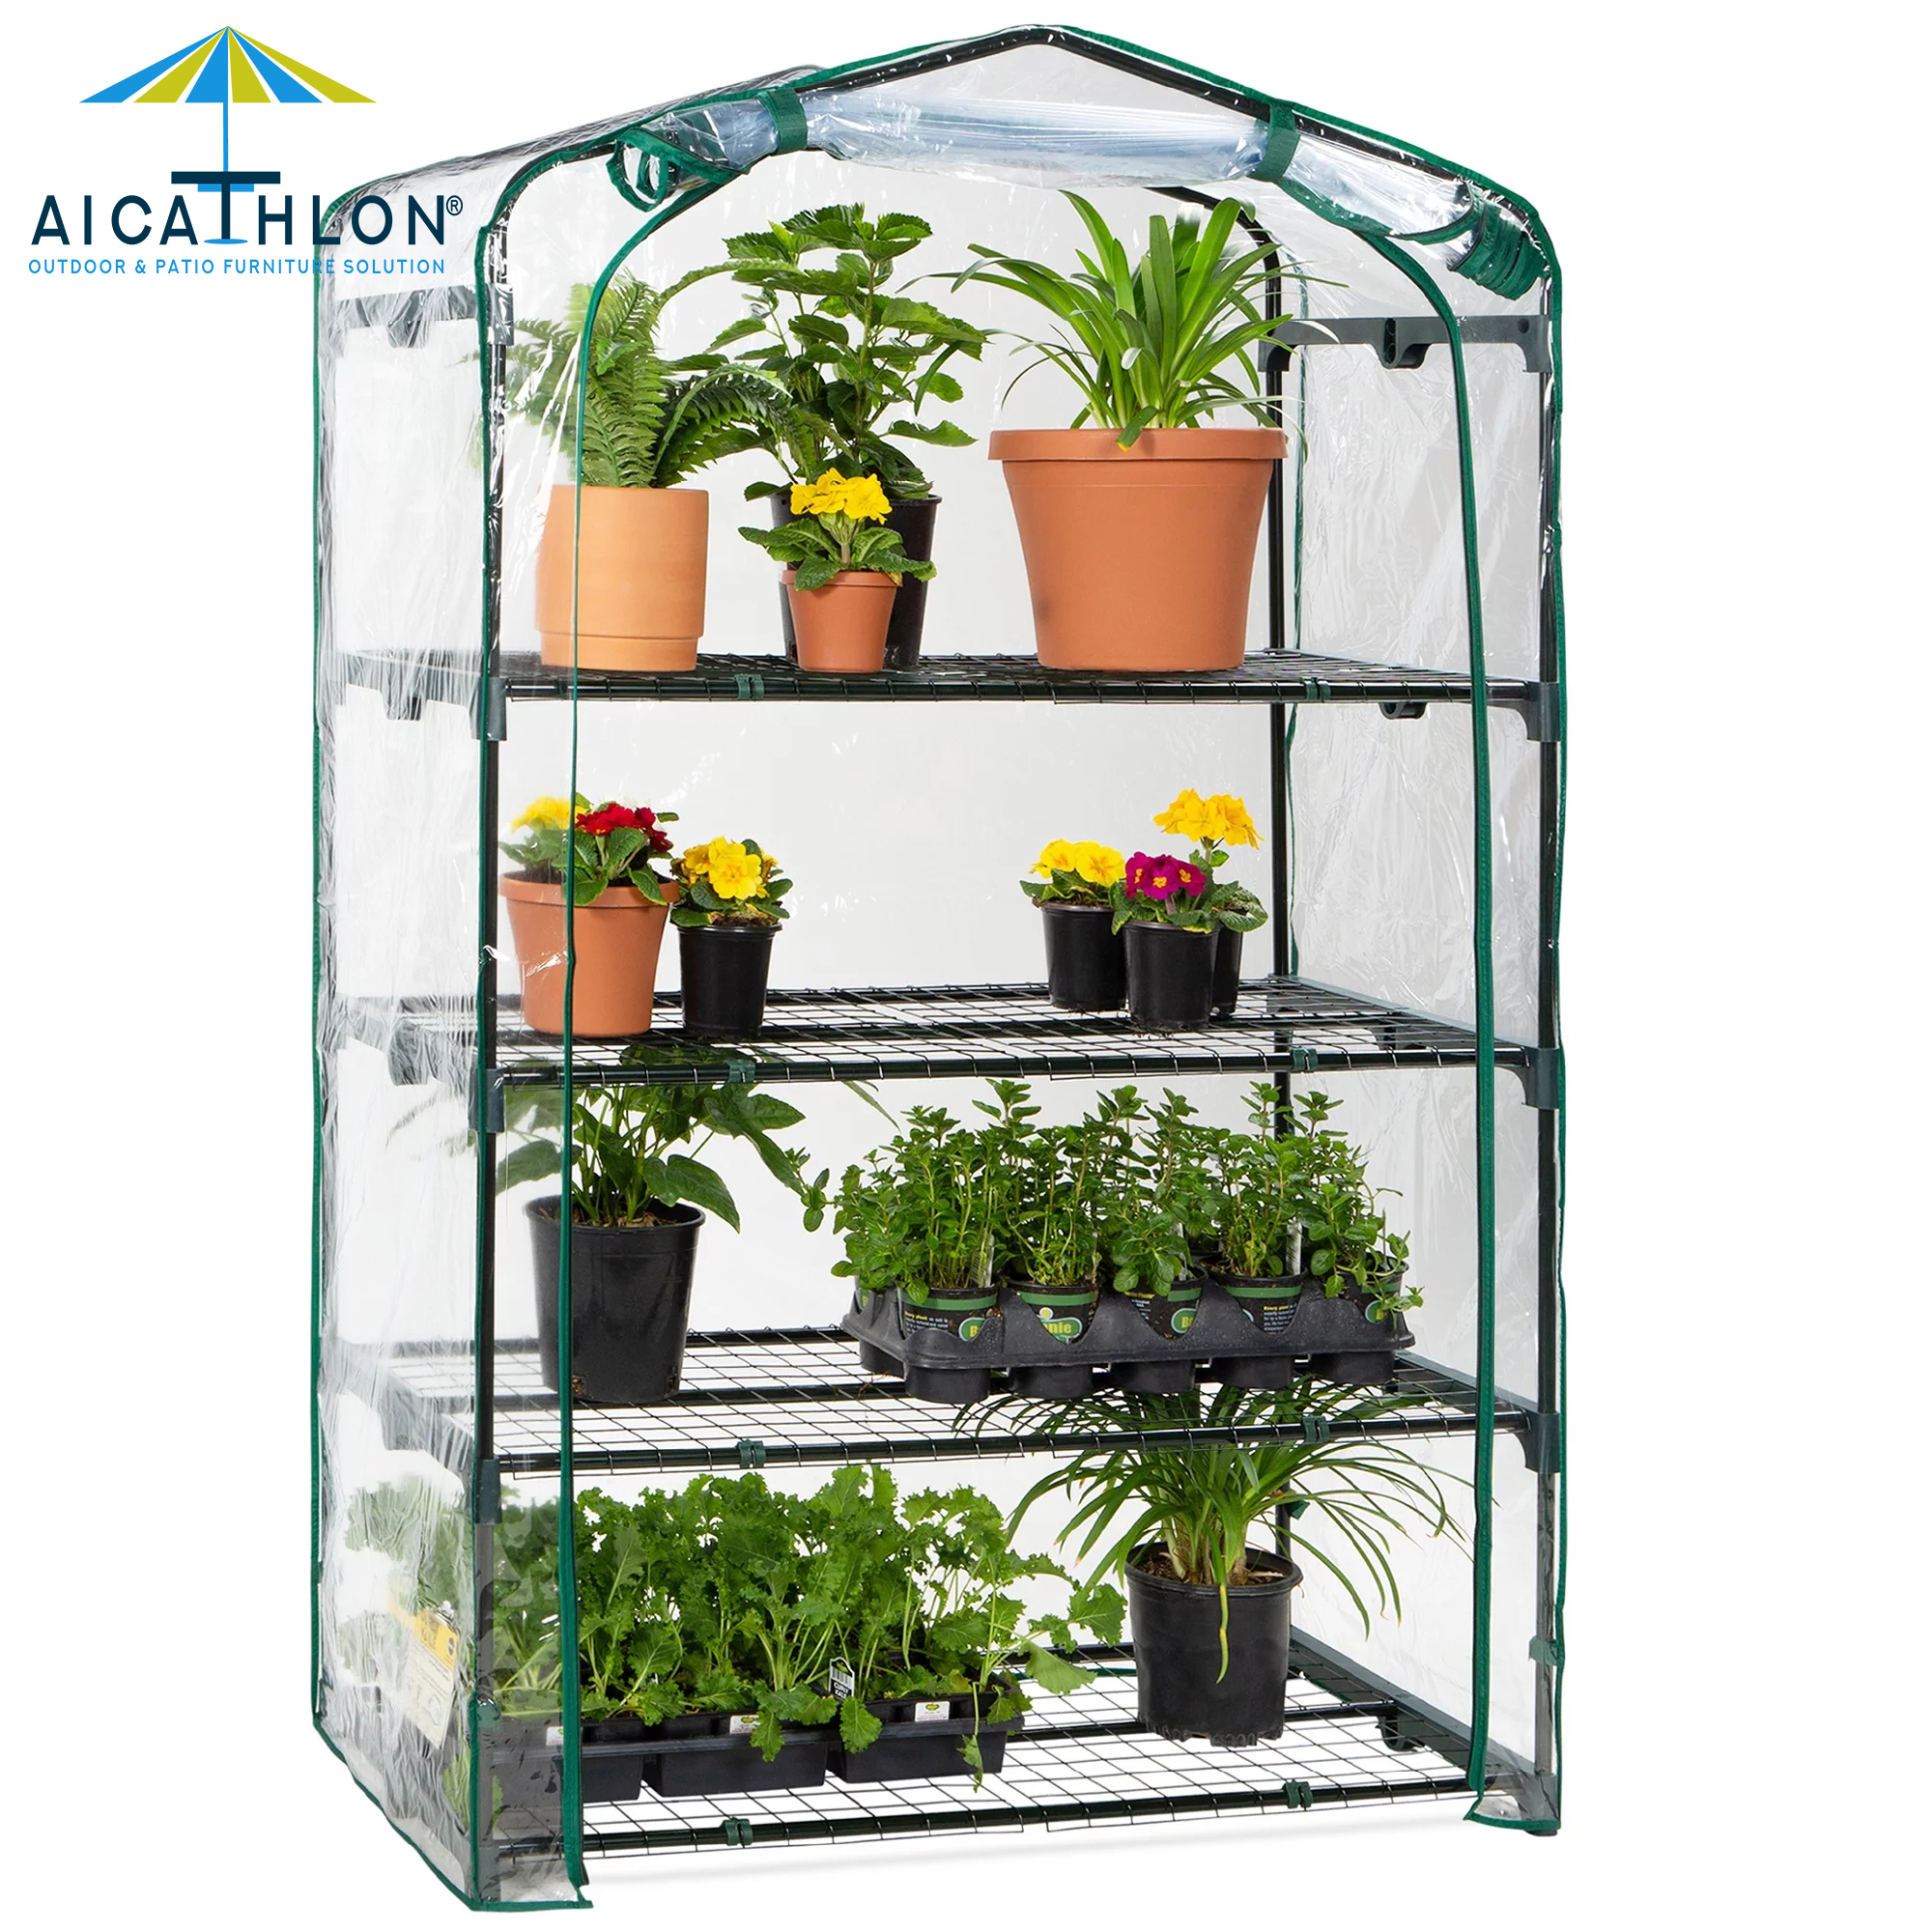 AICATHLON High Quantity Portable Garden Green House with Zippered PVC Cover, Metal Shelves for Garden Yard Patio Indoor Outdoor, Extra Hooks Wind Ropes 8 Net Rack Buckles